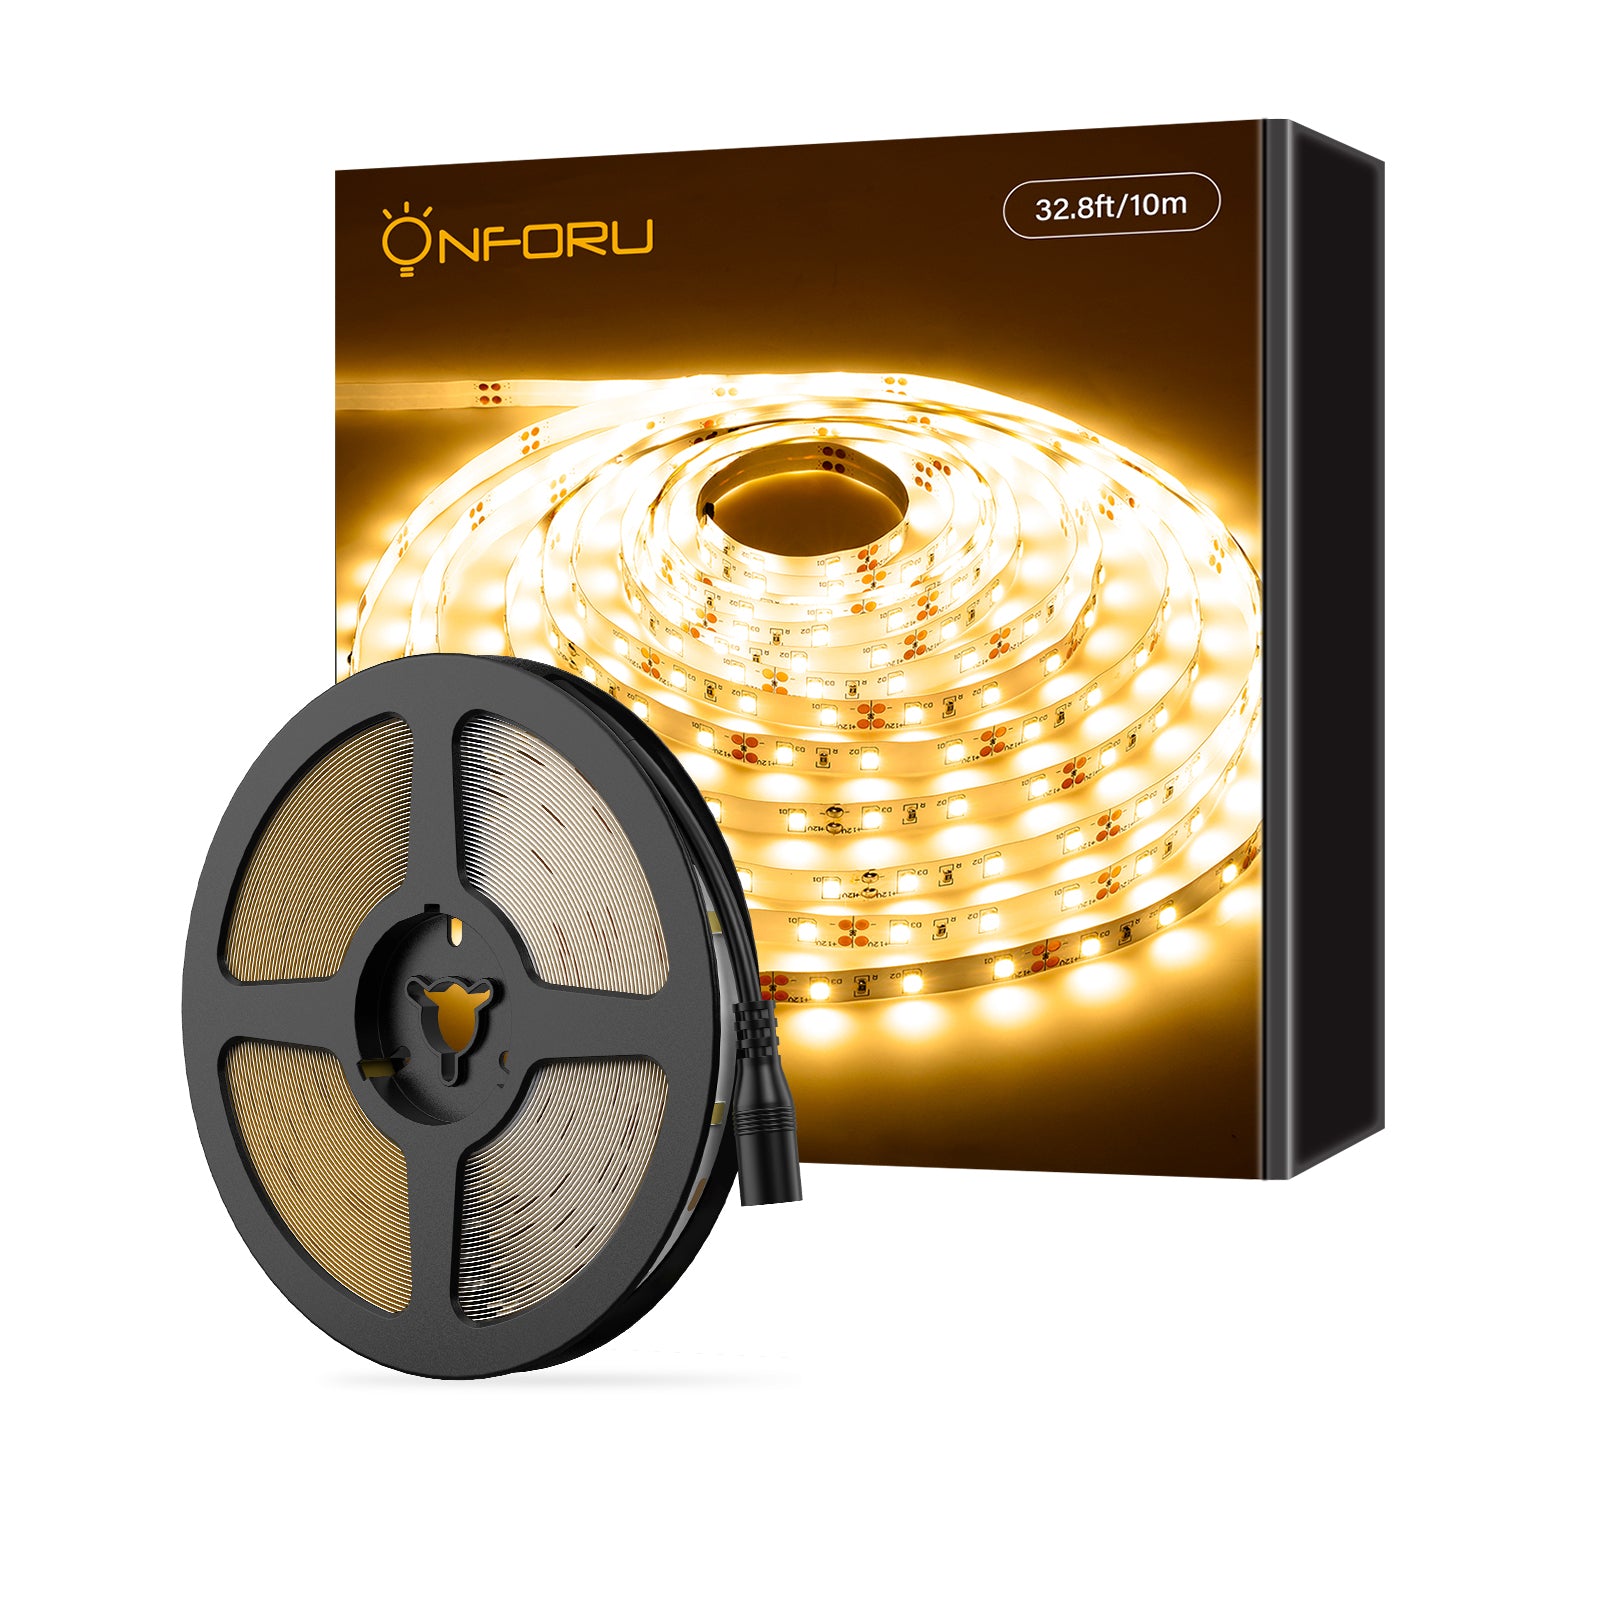 Is it worth getting LED strip lights?